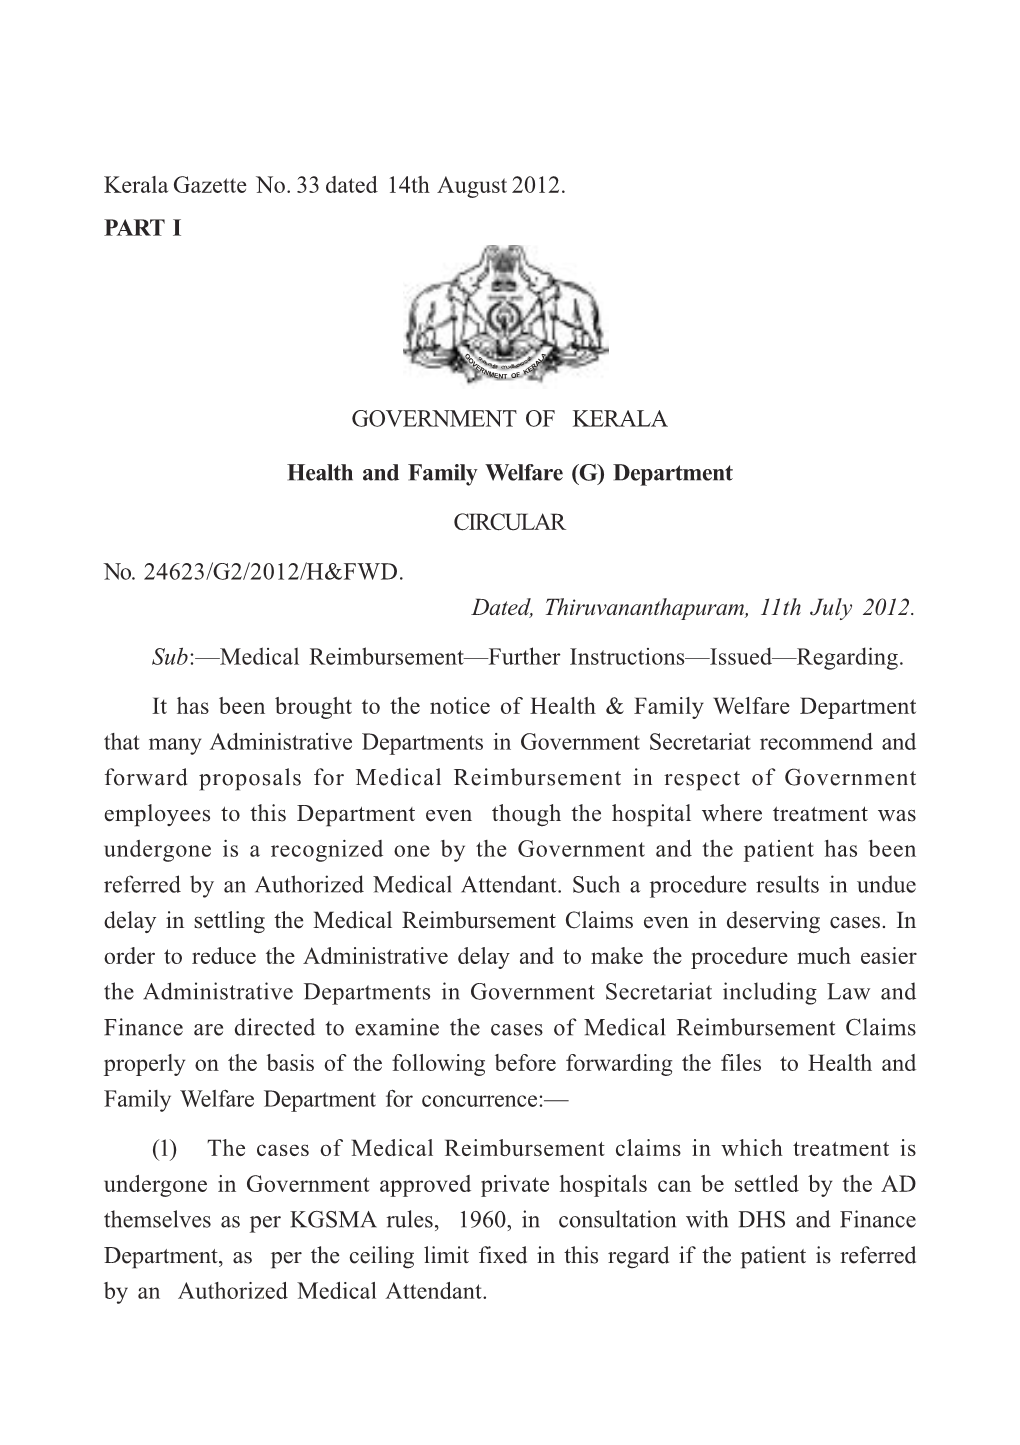 GOVERNMENT of KERALA Health and Family Welfare (G) Department